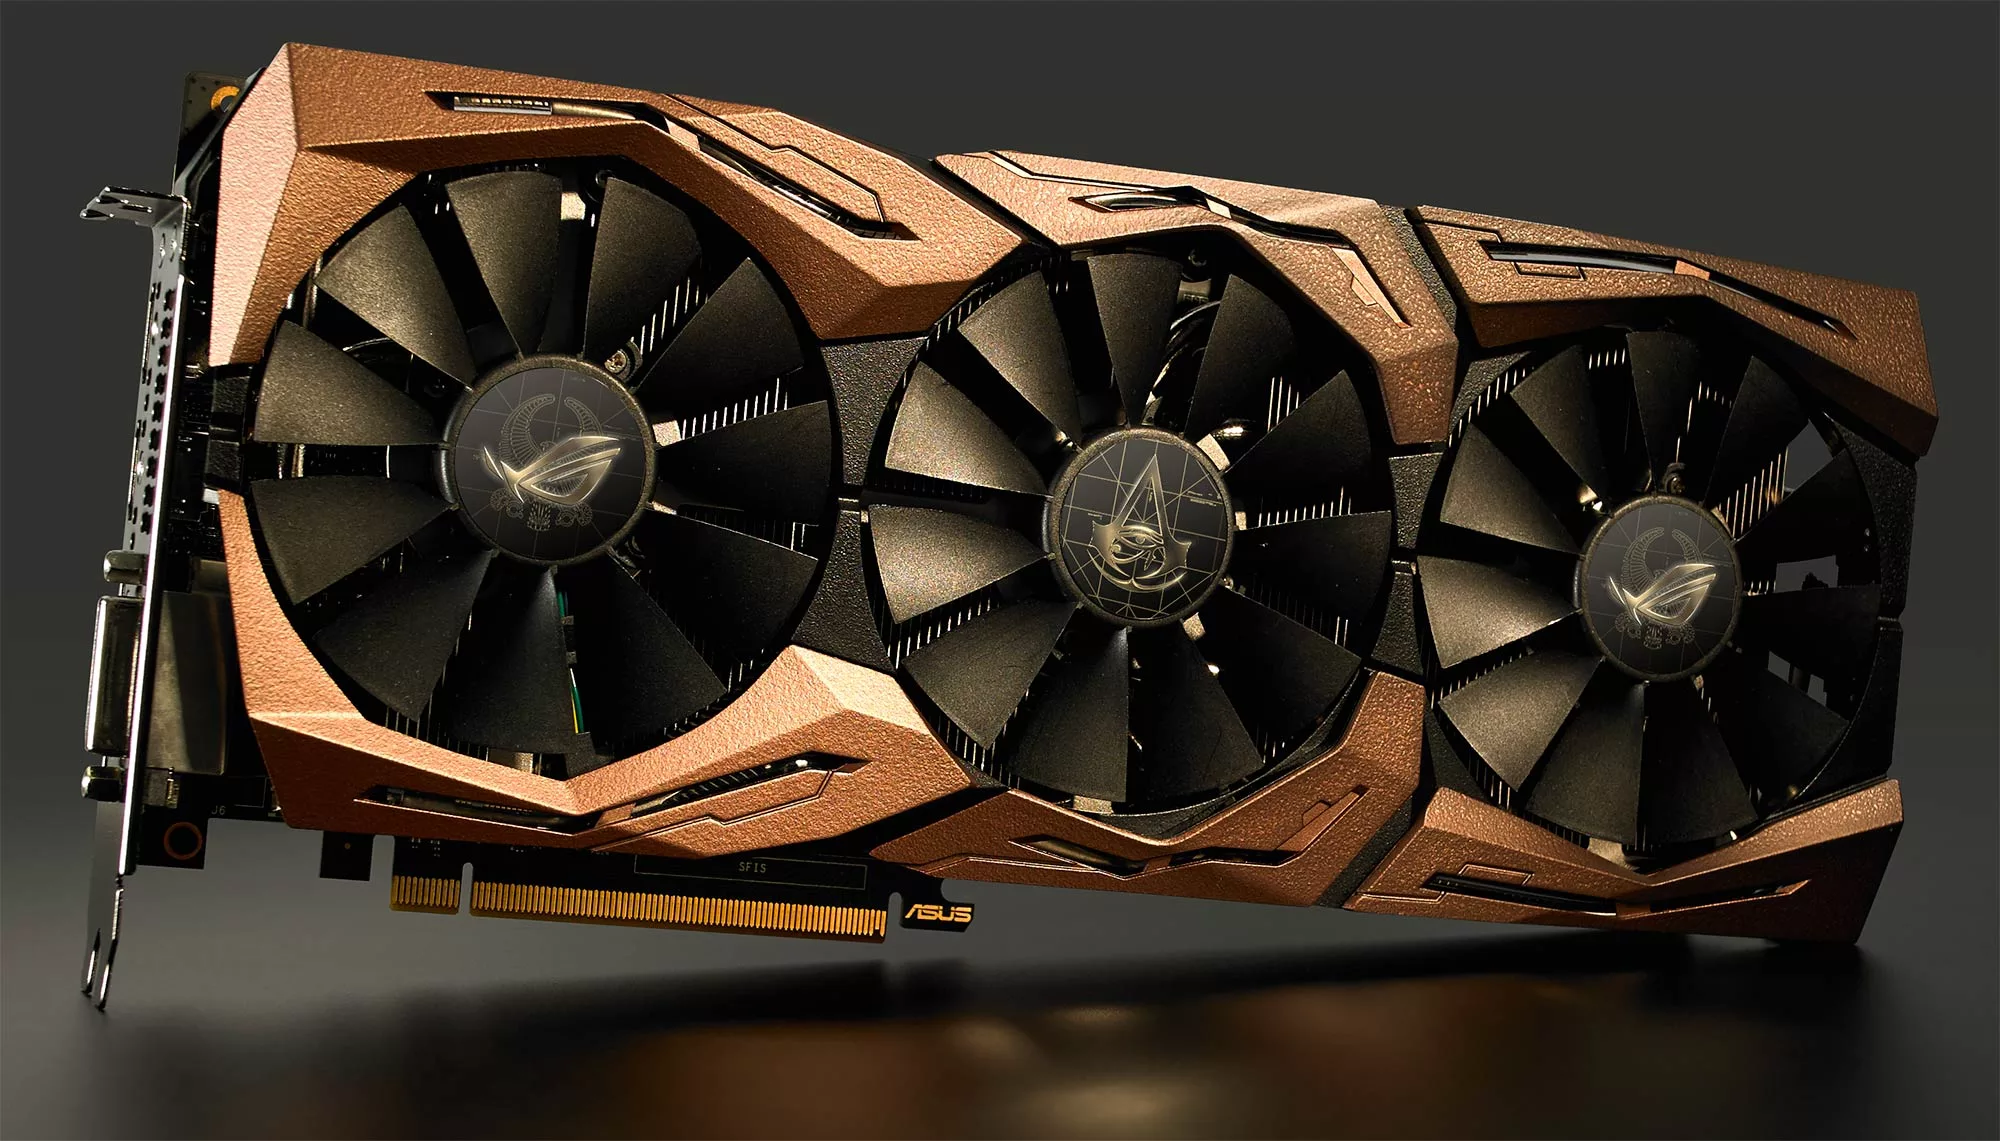 Tilskyndelse Resignation gradvist Check out our limited edition Strix 1080 Ti graphics card for Assassin's  Creed: Origins | ROG - Republic of Gamers Global